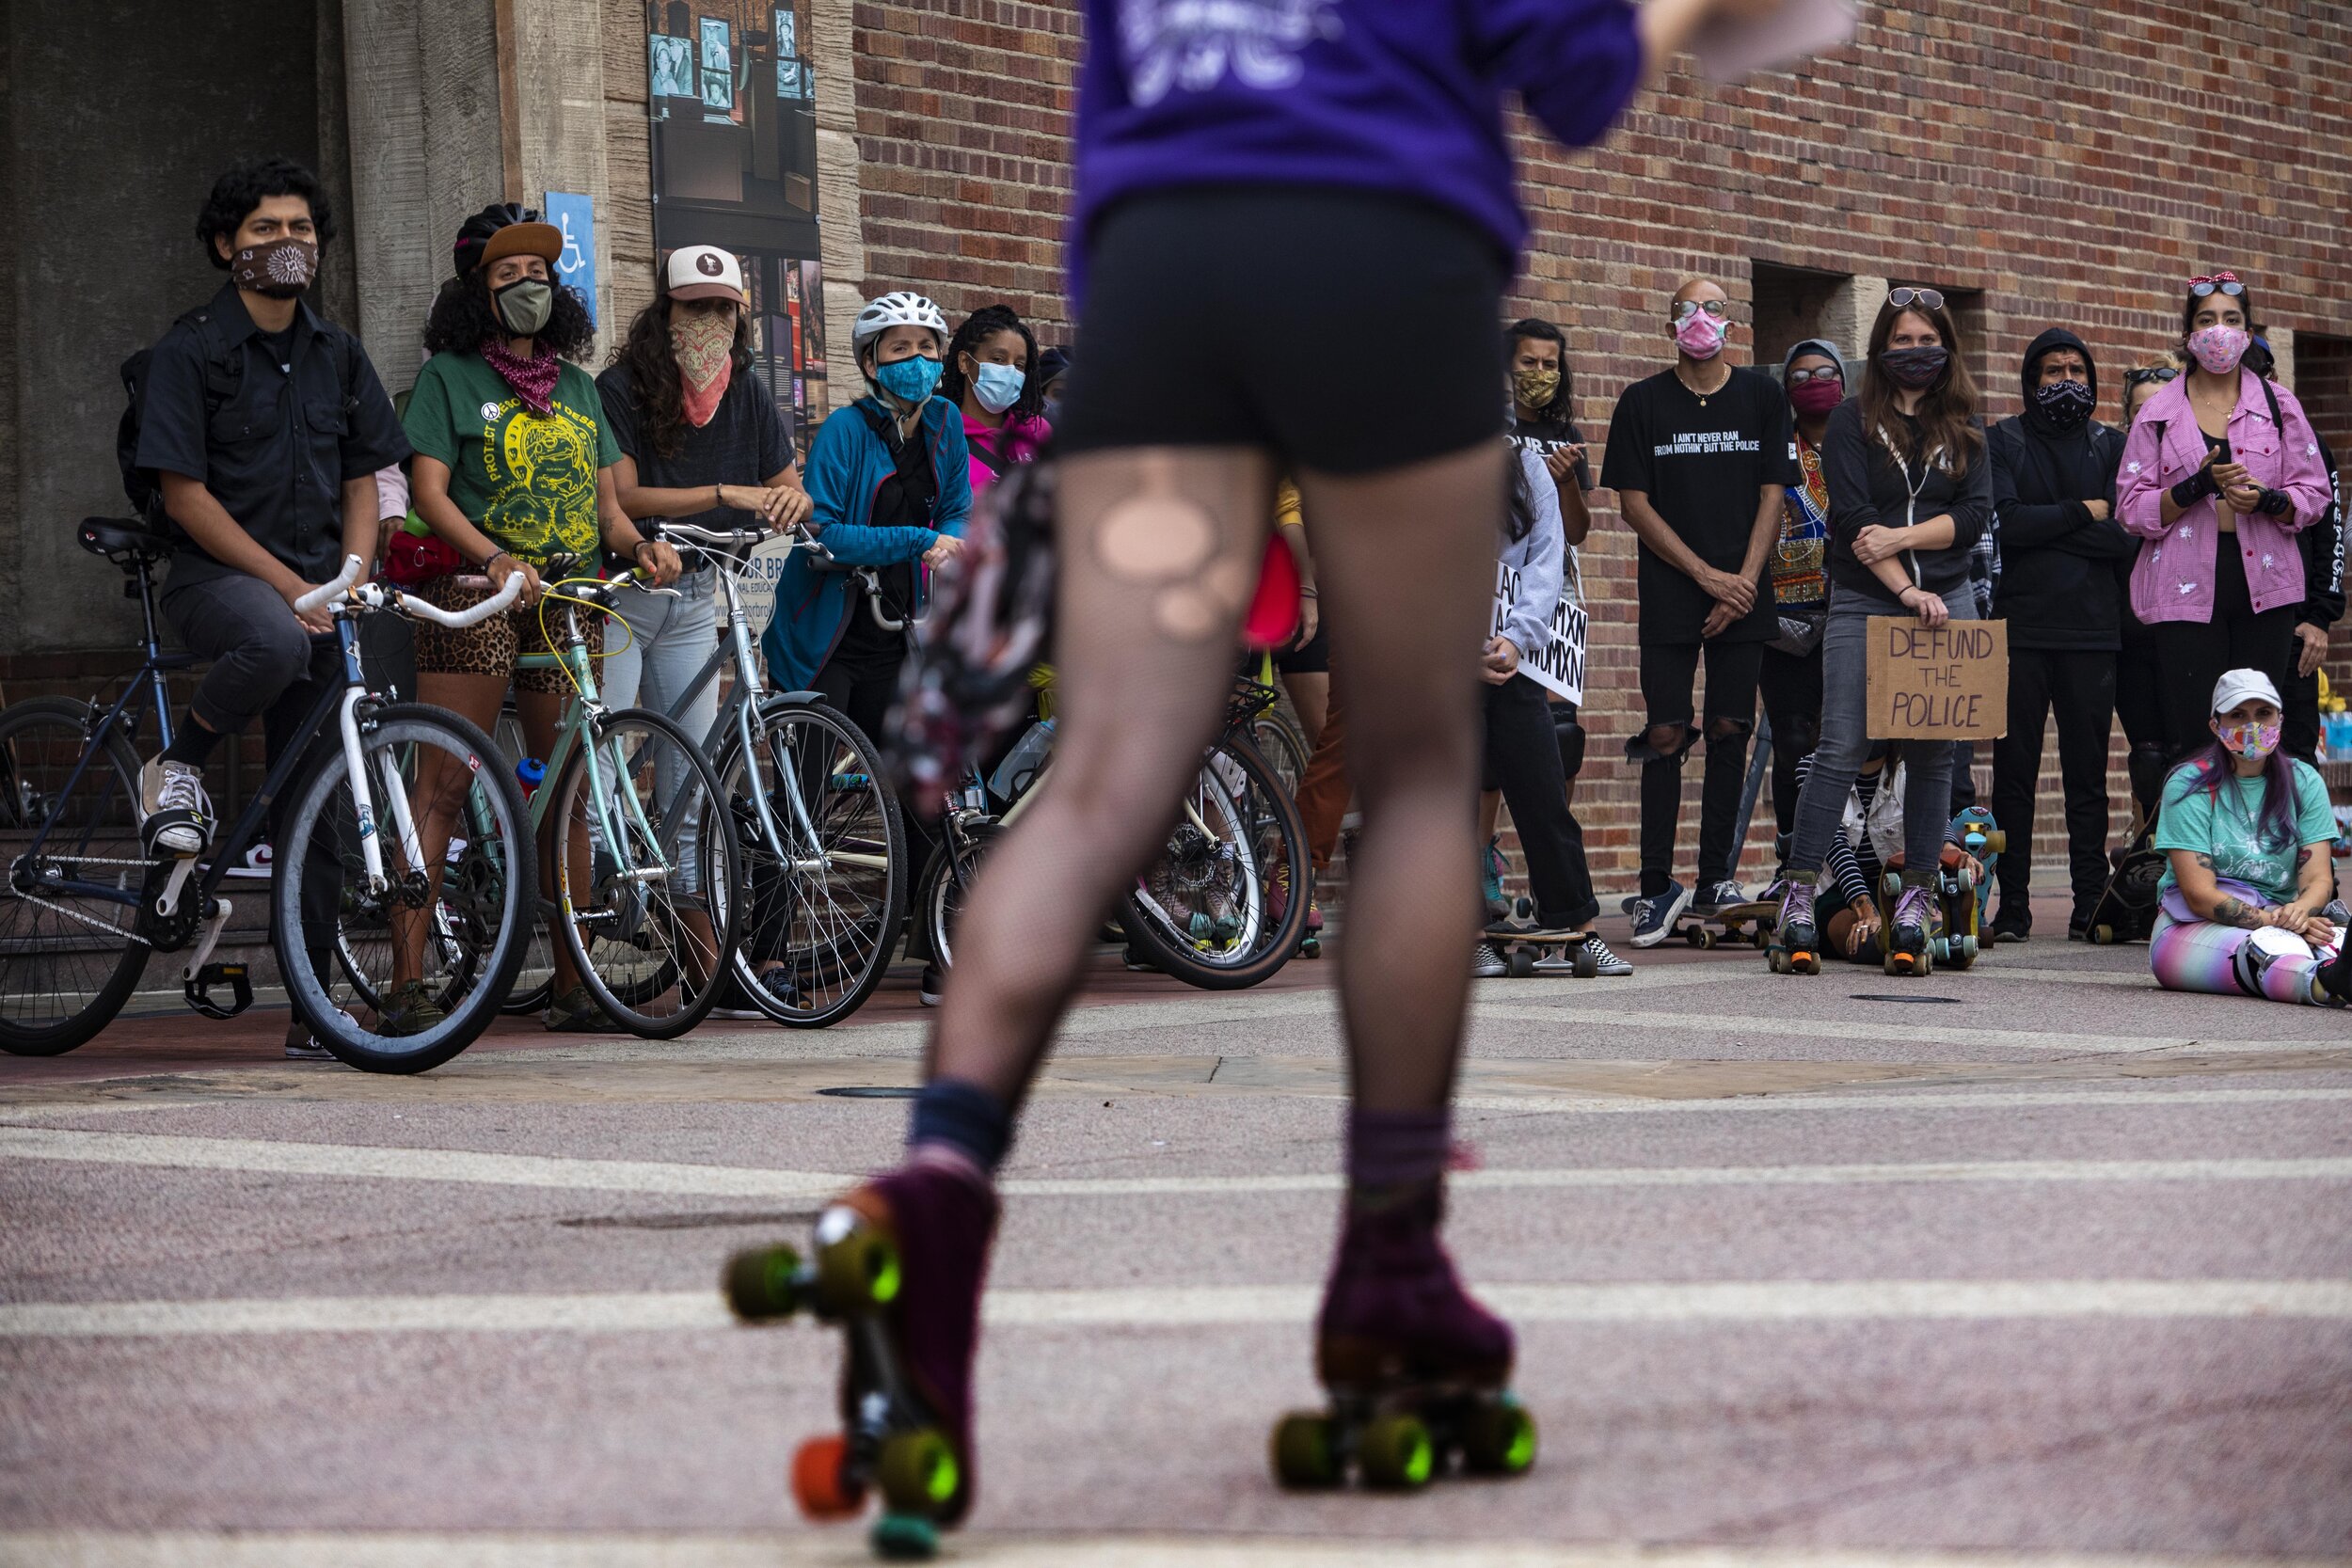  Ariana Chavez (AKA Cha Cha) talks to the crowd at the Rise &amp; Skate all wheels welcome protest in celebration of Juneteenth and in solidarity with Black Lives Matter. The start and end the rollouts with a group circle of participants including, c